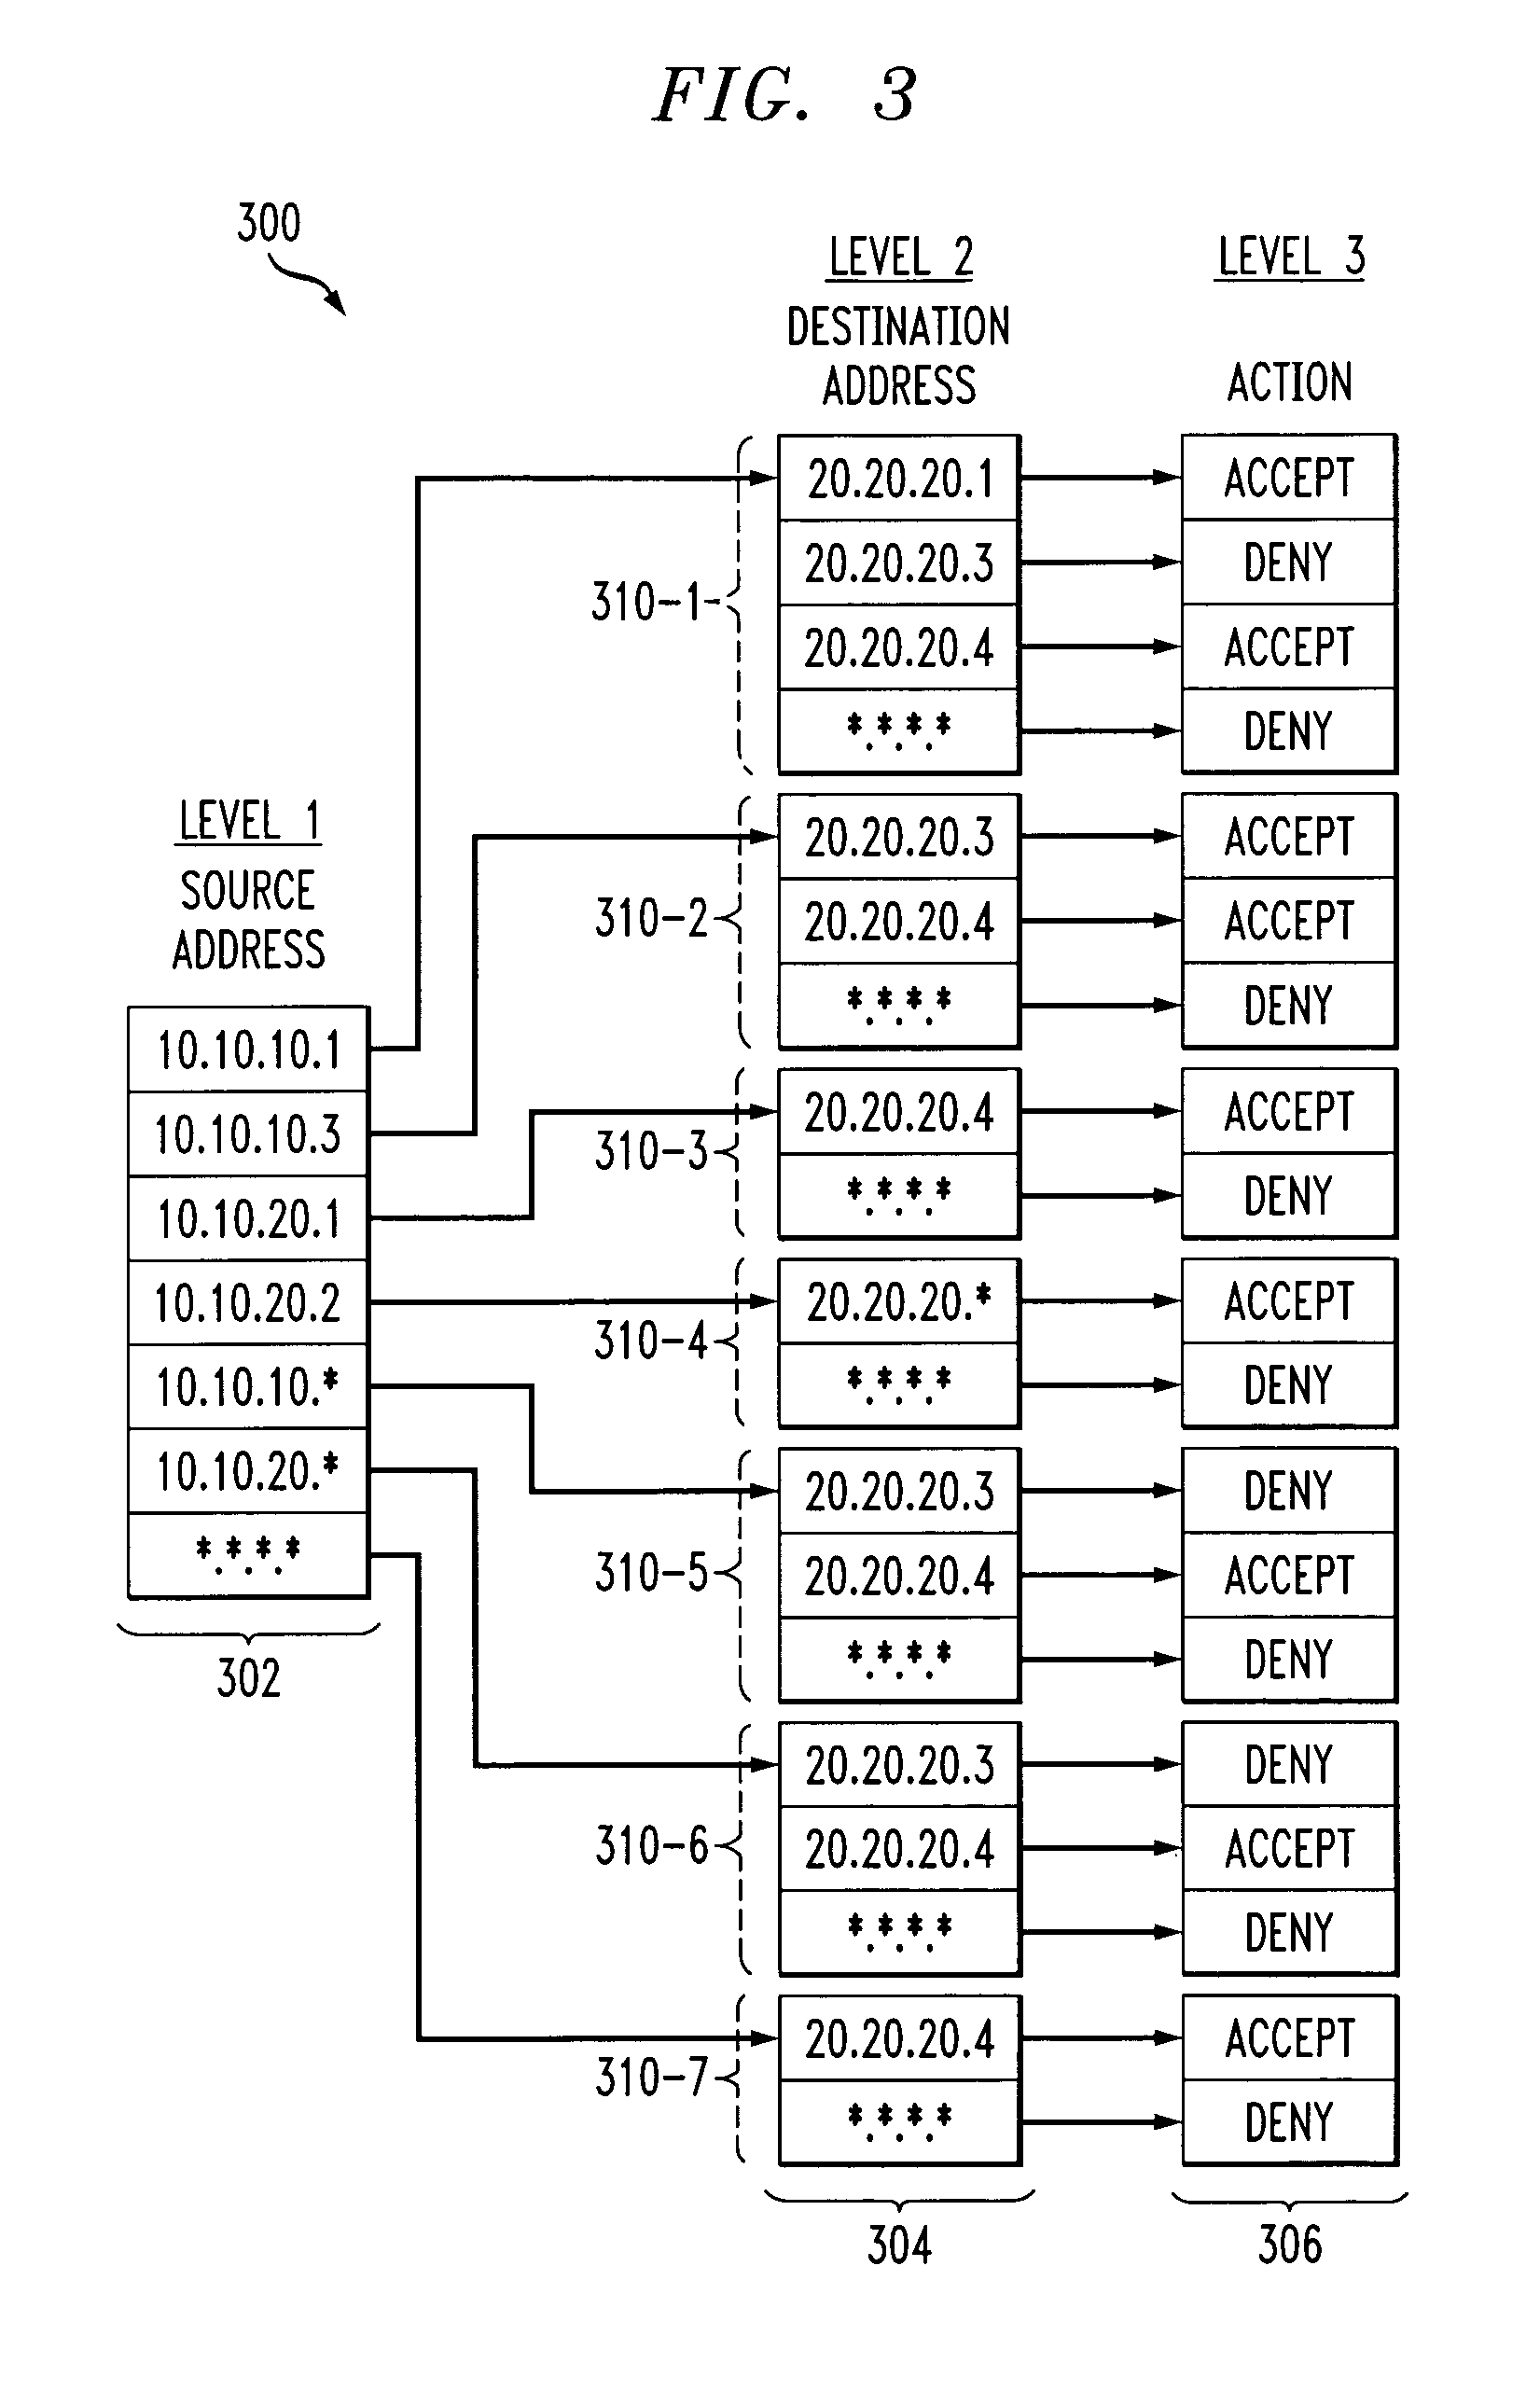 Access control list constructed as a tree of matching tables